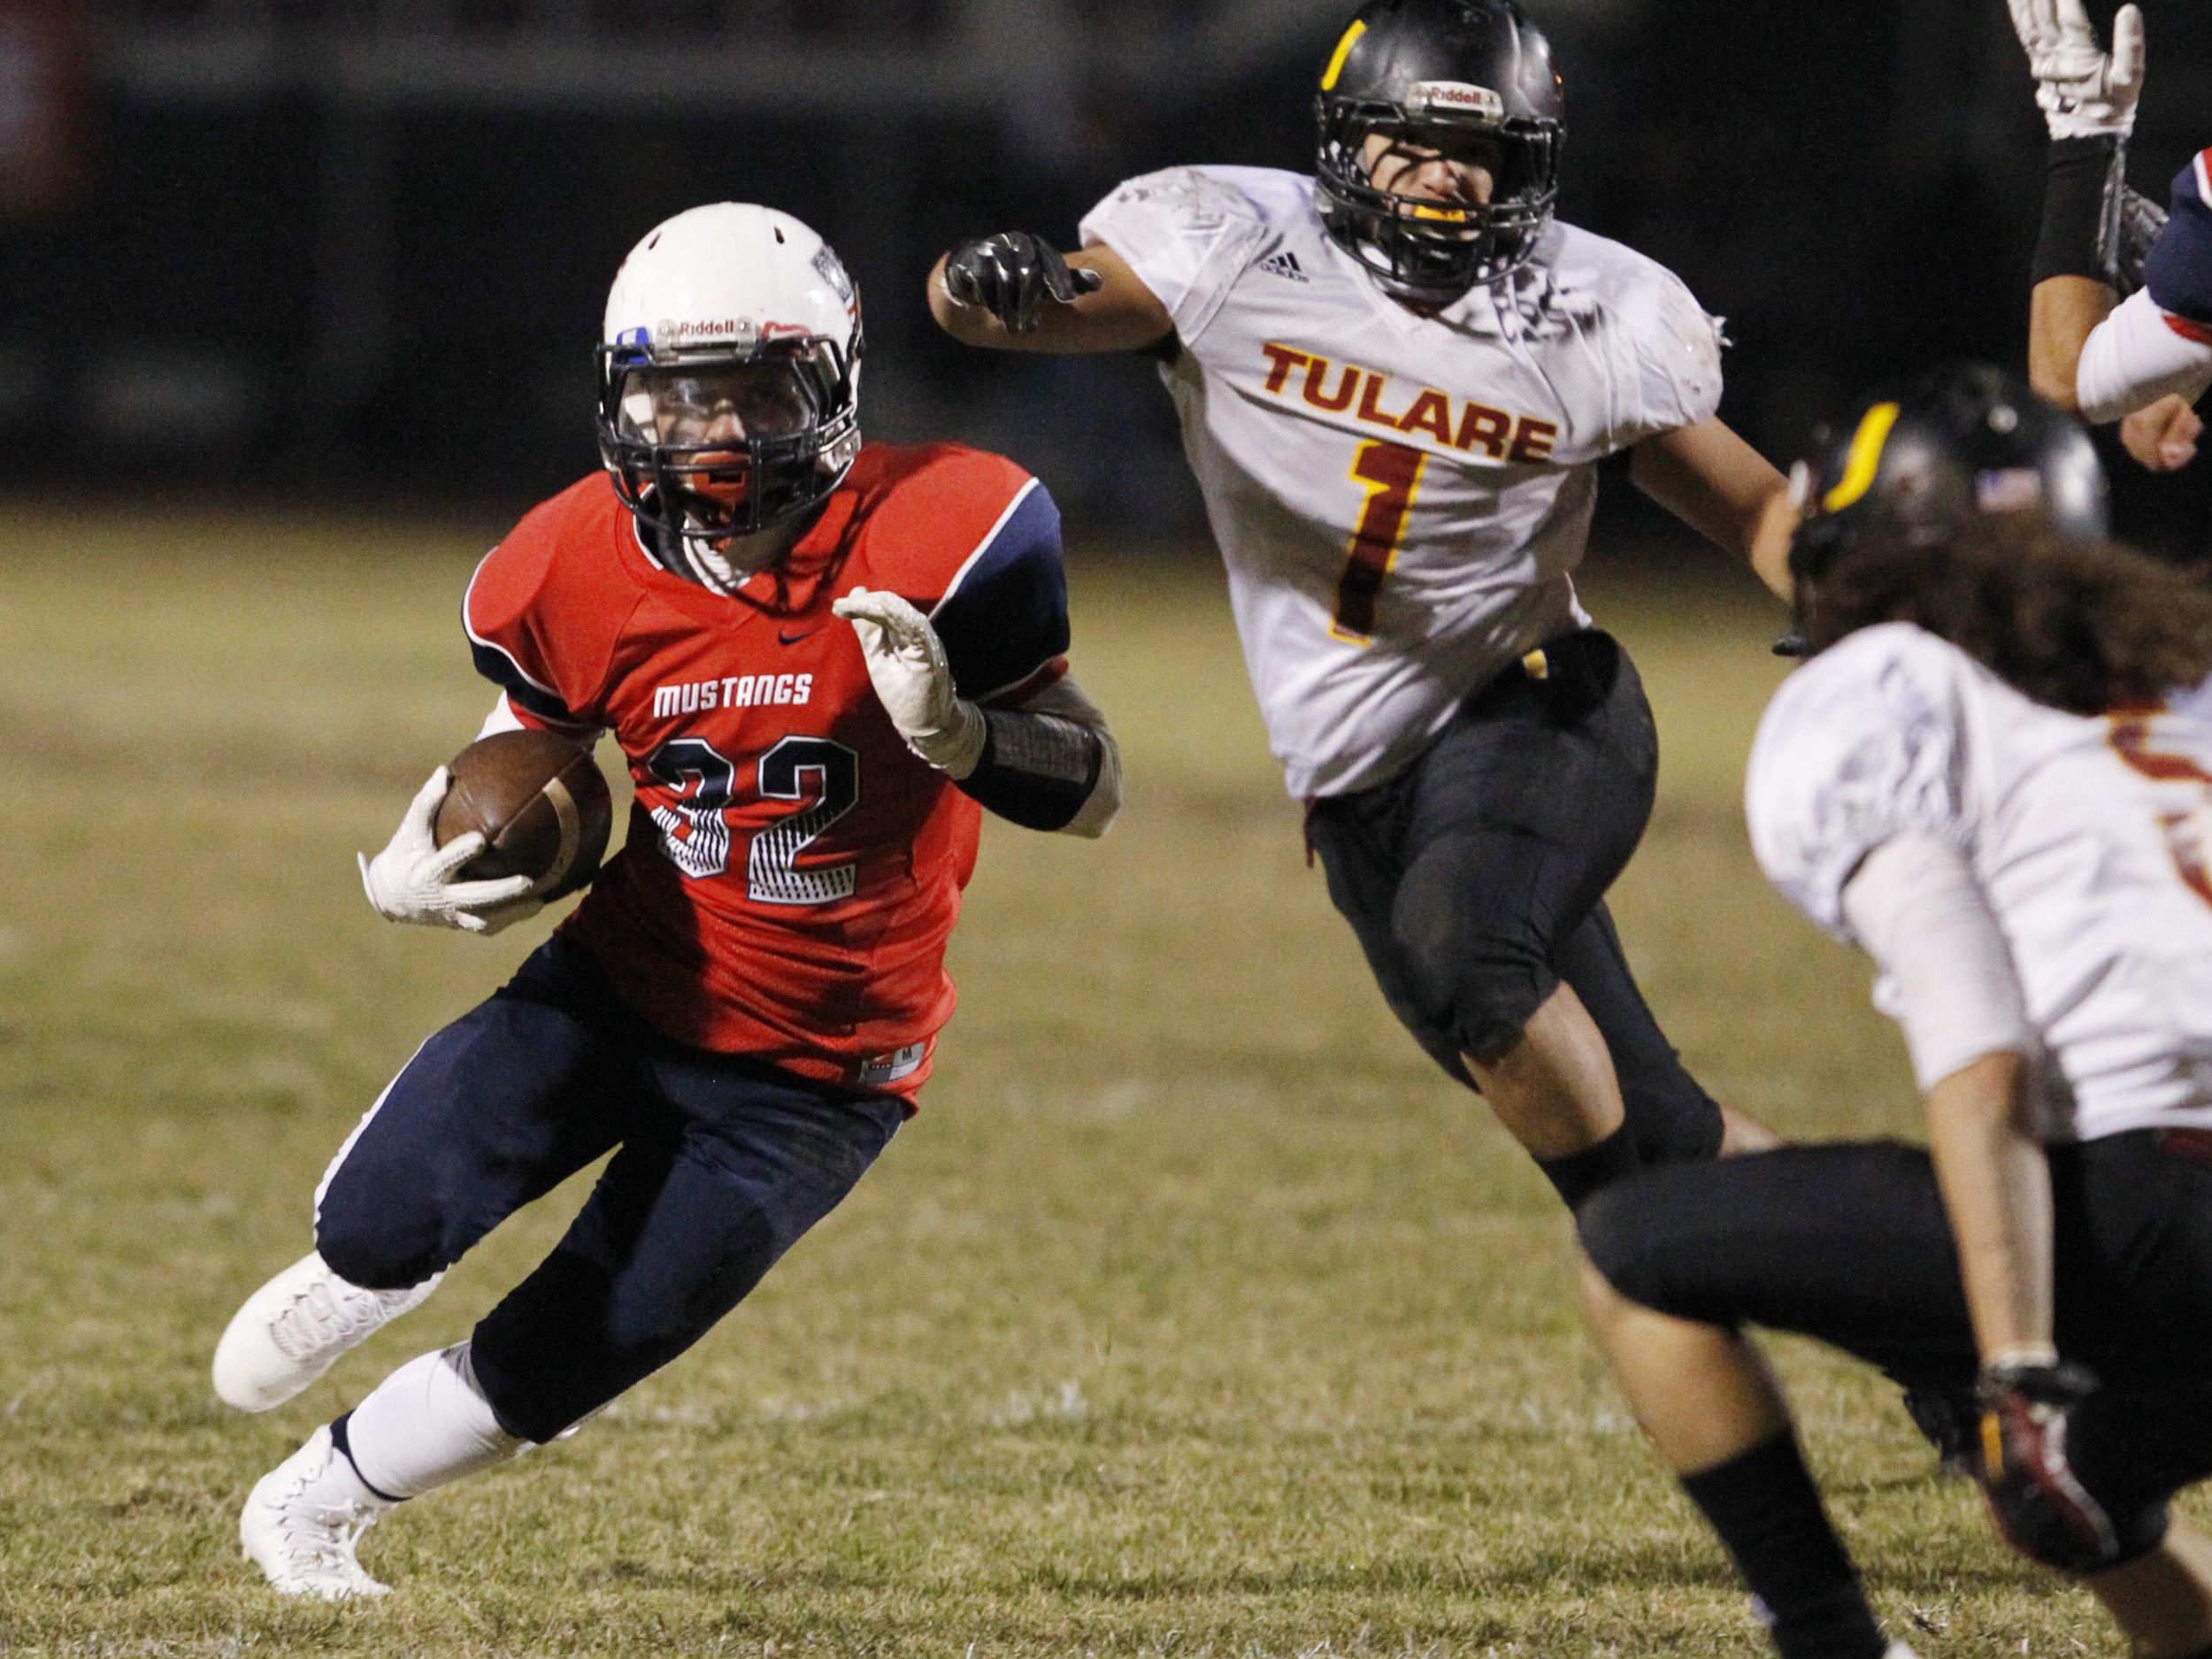 Tulare Western’s Mason Berrnardo looks for running room against Tulare Union during the Bell Game on Nov. 6. Tulare Western and Tulare Union have playoff games tonight. Tulare Union hosts Sunnyside, and Tulare Western is at Tehachapi.